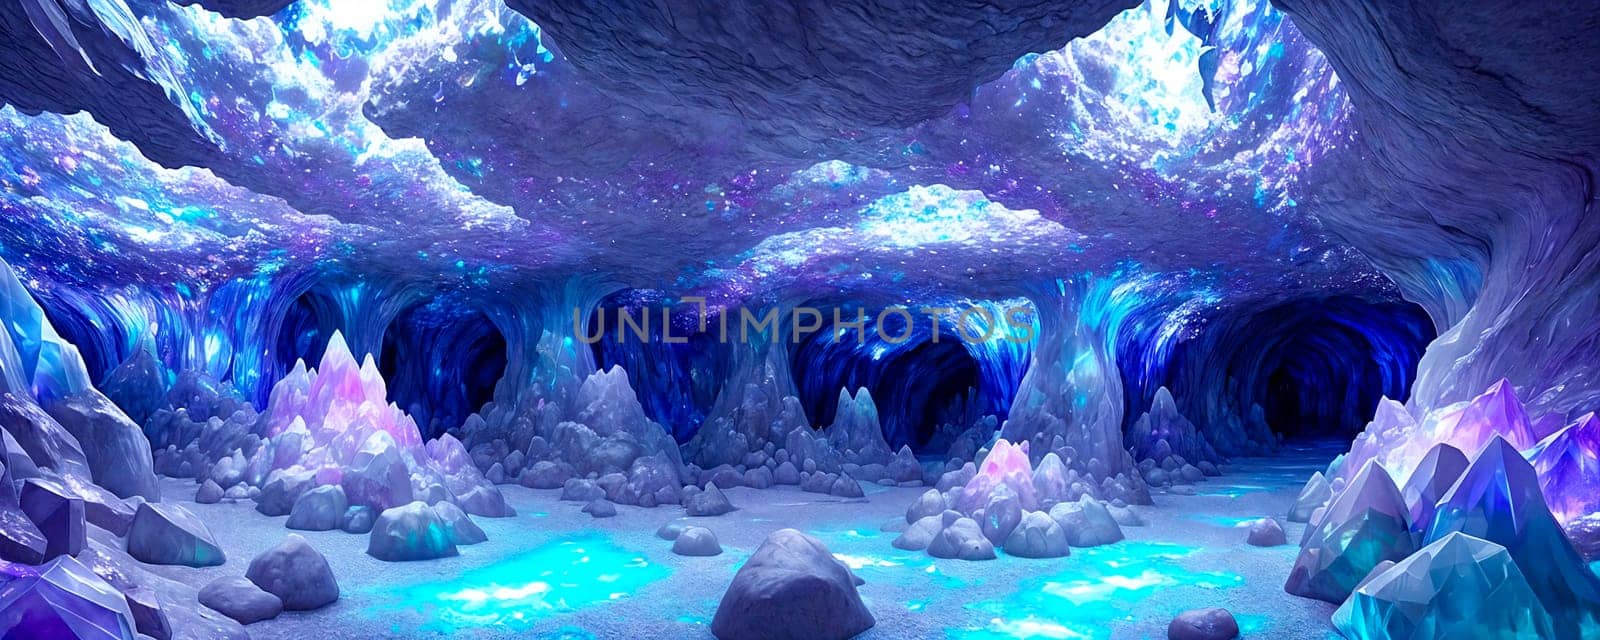 Crystal Cave, a subterranean world filled with shimmering crystal formations by GoodOlga